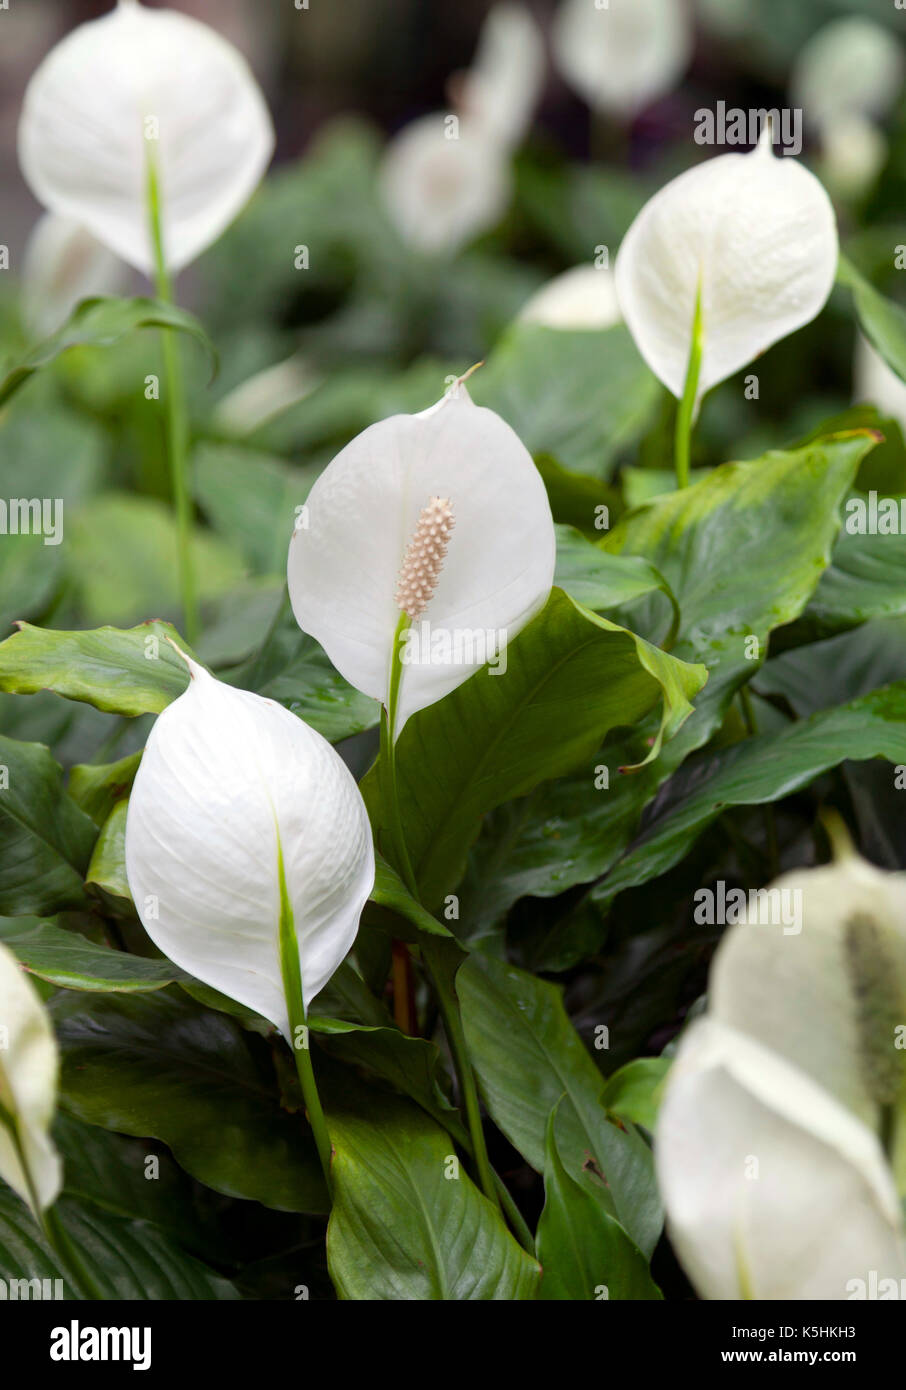 Calla lily, Zantedeschia aethiopica - South African plant widely cultivated for its showy pure white spathe and yellow spadix Stock Photo